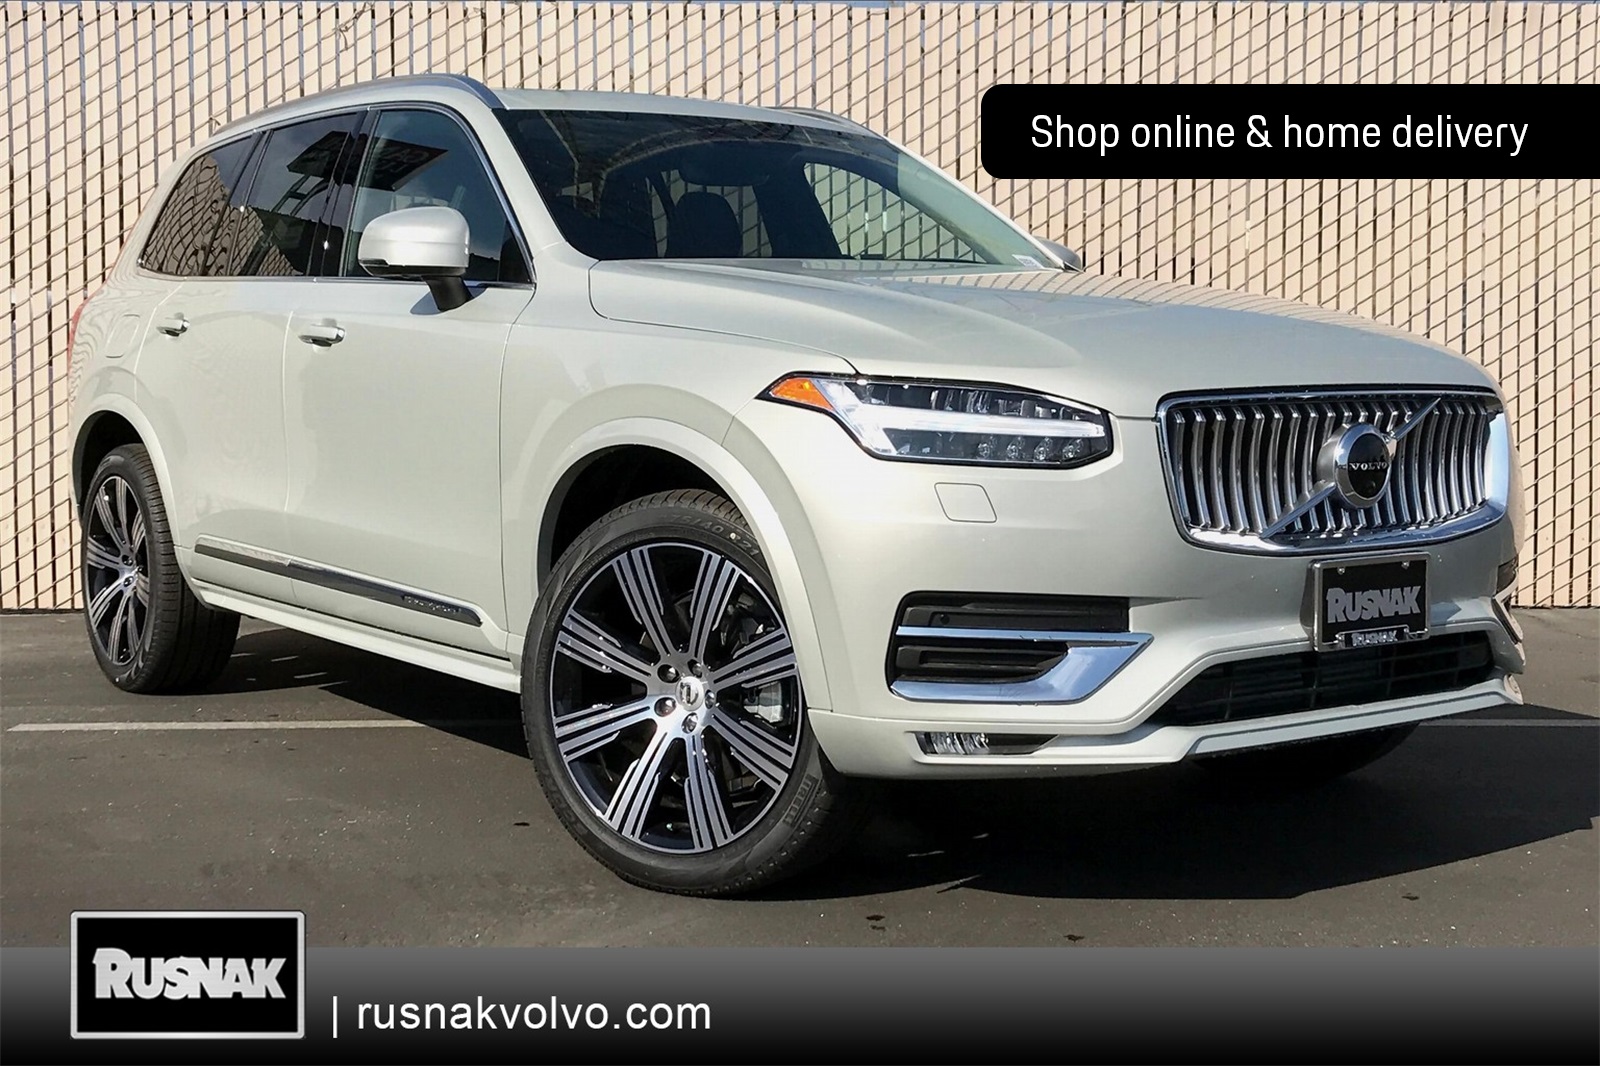 New 2020 Volvo Xc90 For Sale Lease Manchester Mo Vin Yv4102pm5l1534521